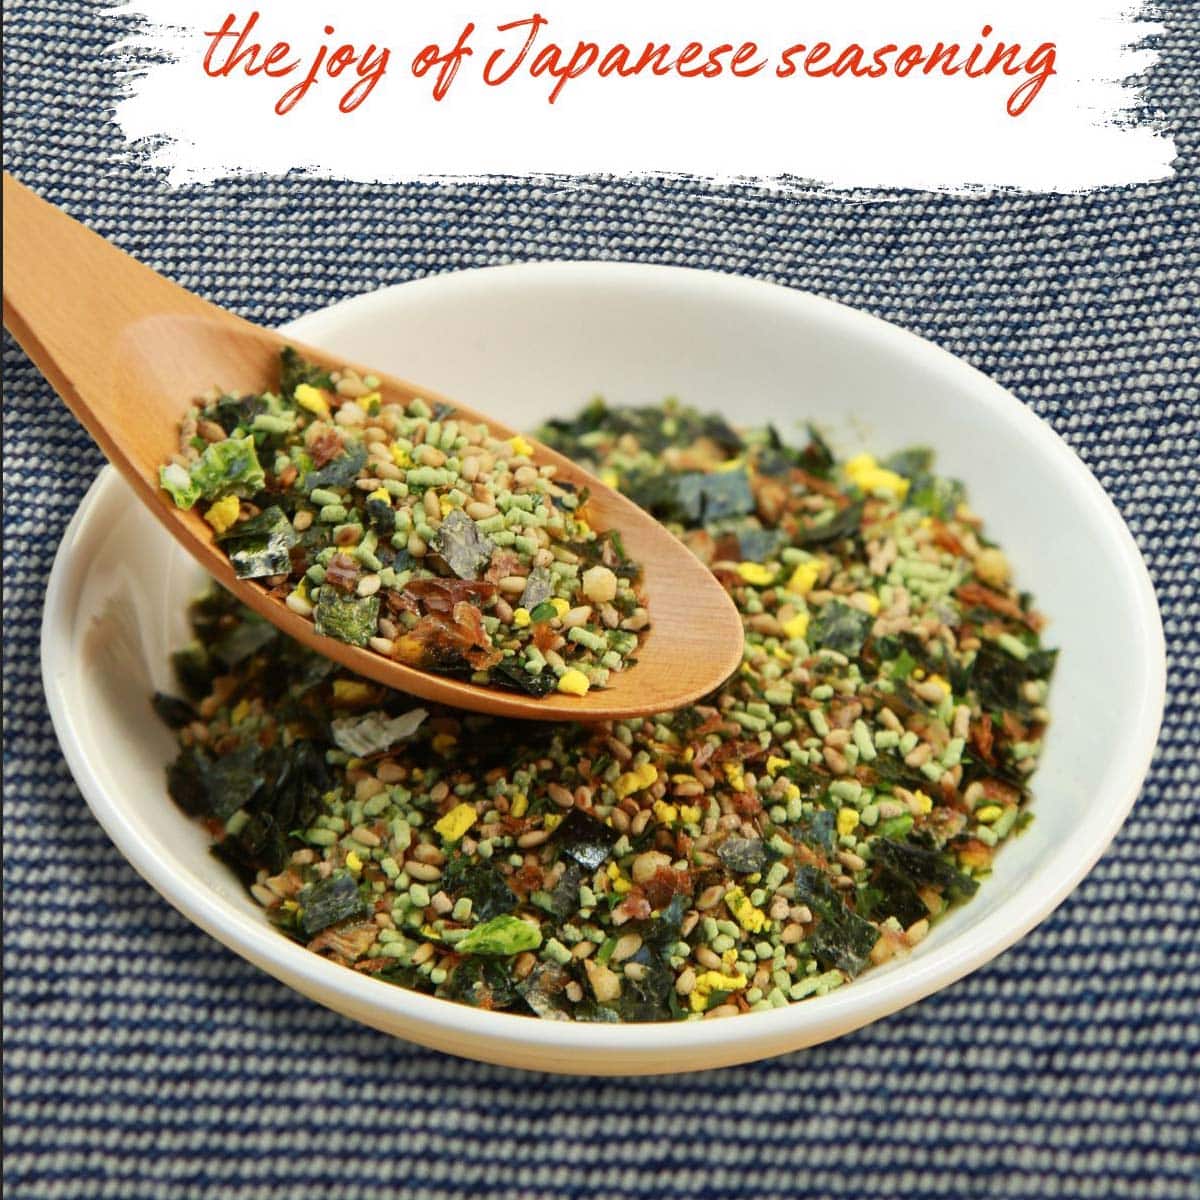 Hand sprinkling homemade Furikake Substitute over a bowl of rice.